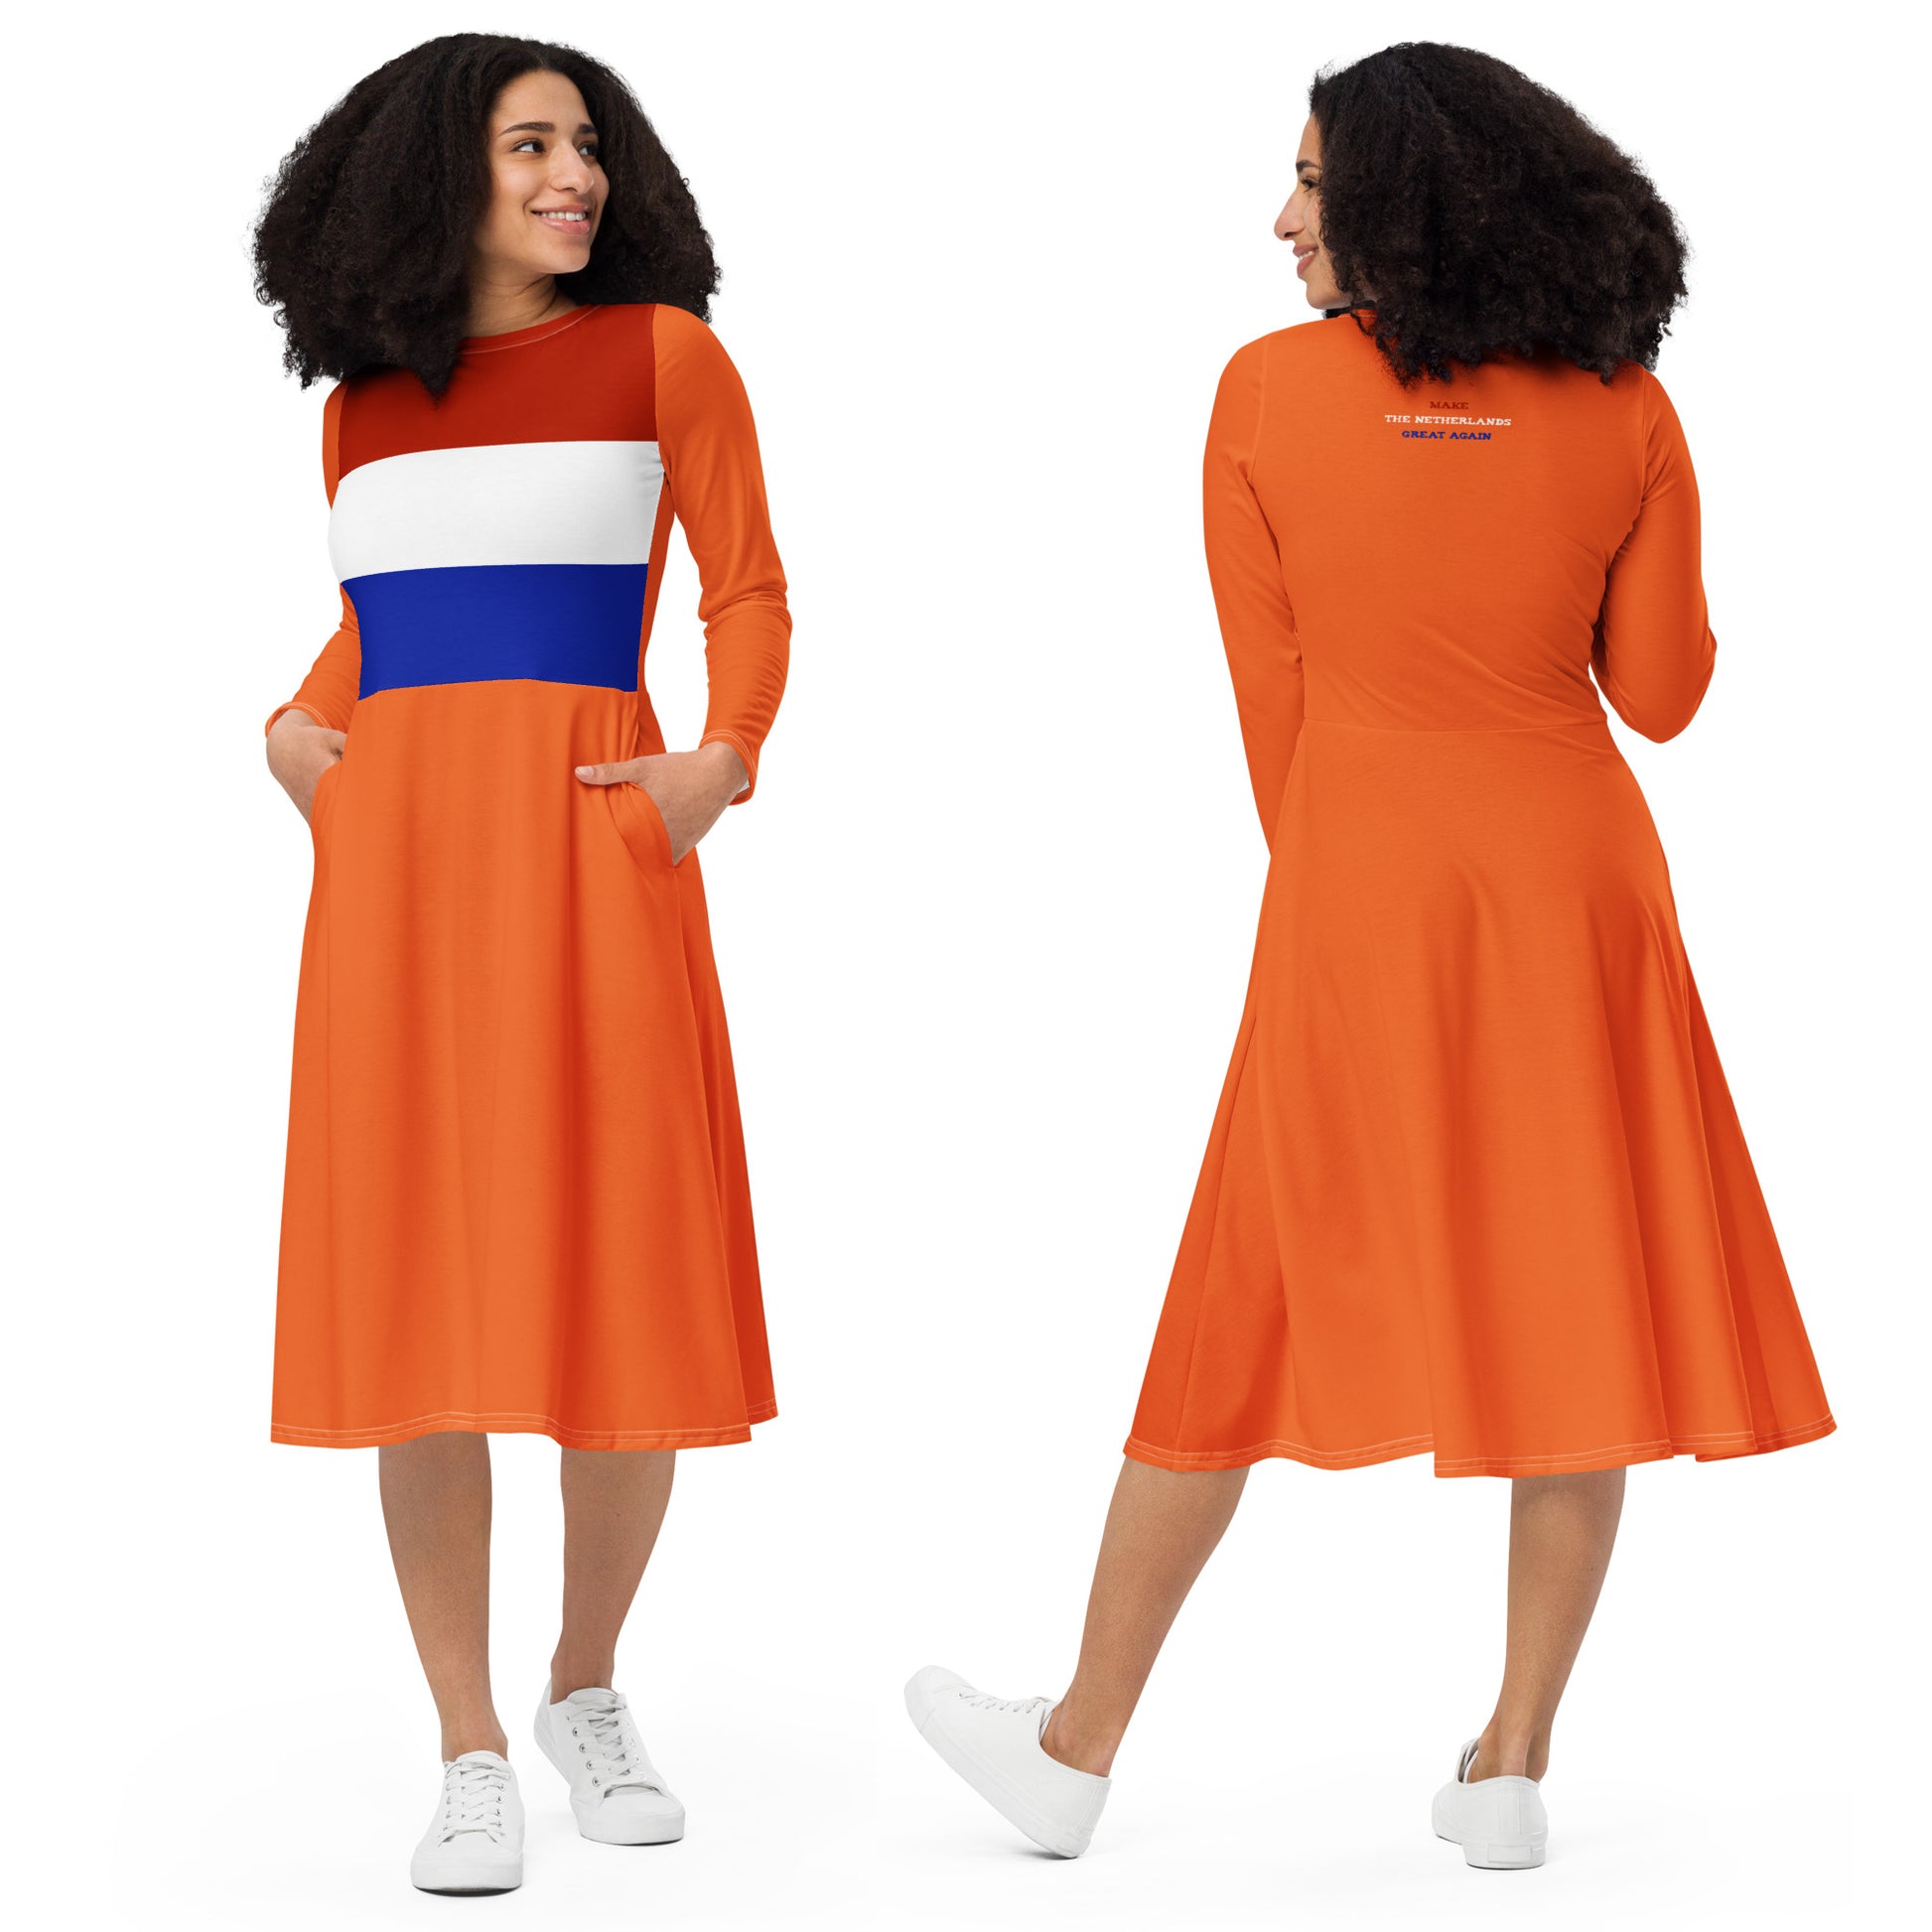 The Netherlands Dress / Dutch Dress With Pockets And Long Sleeves / Small - Plus Size